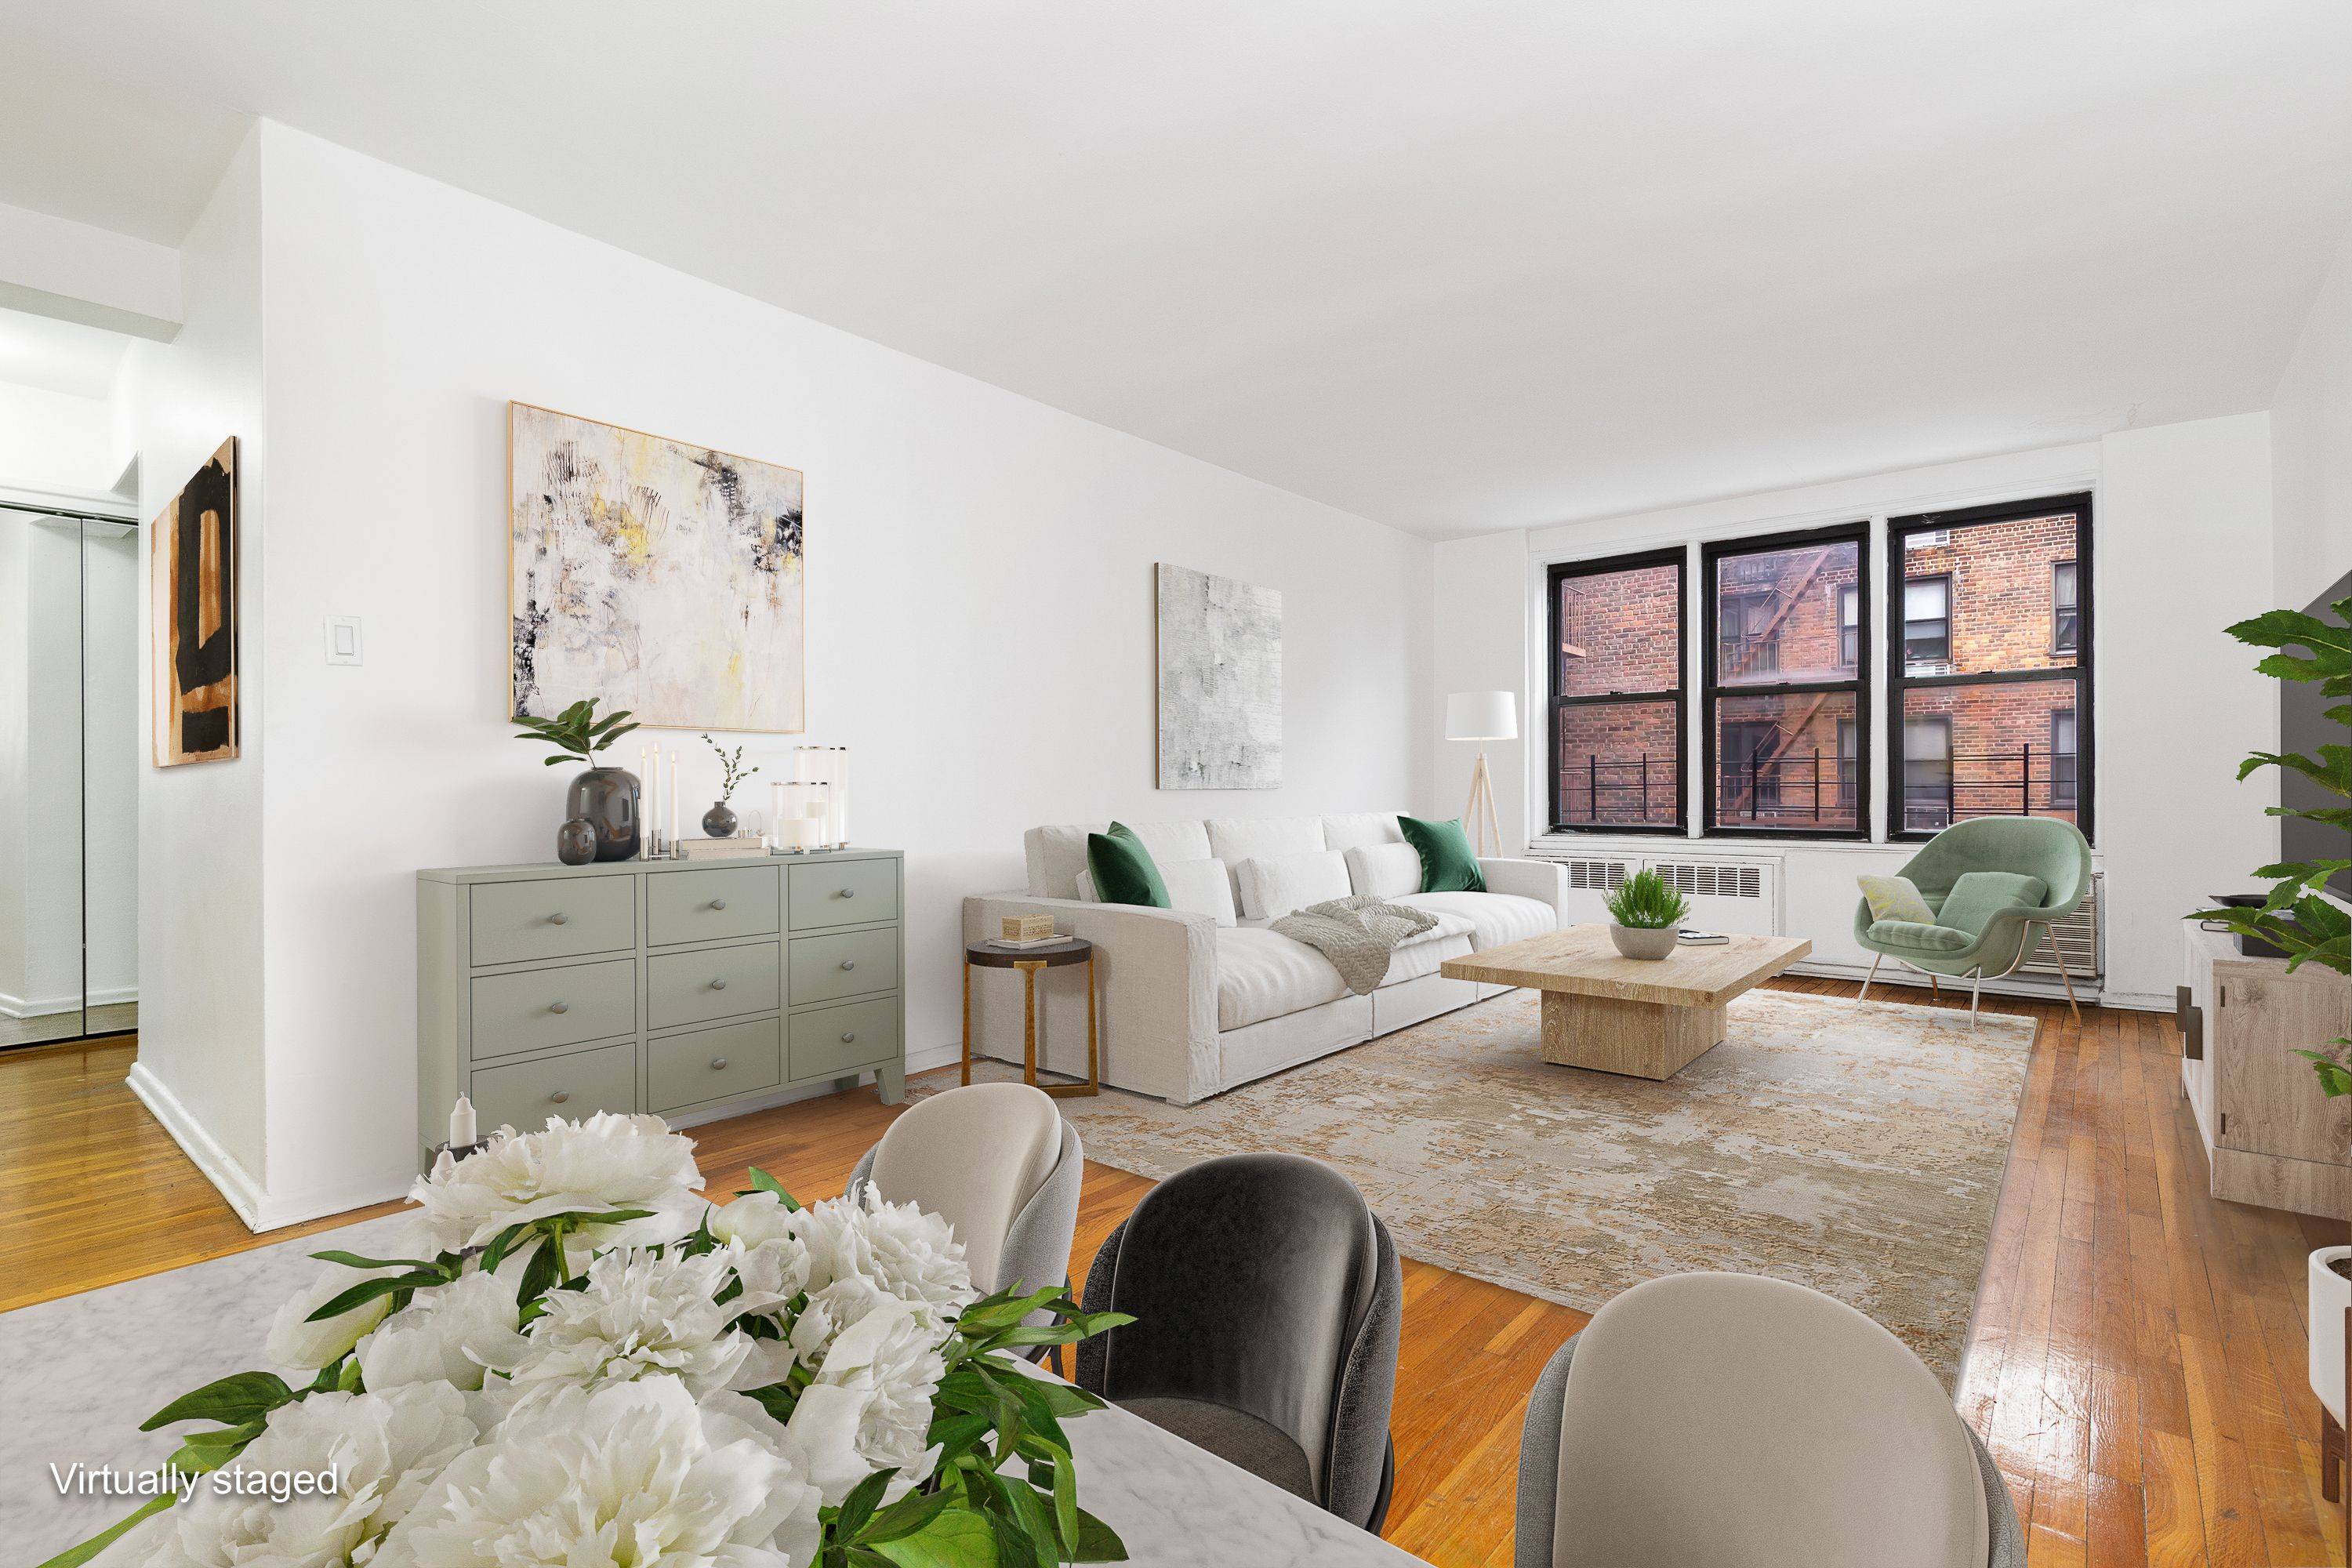 Welcome to 35 20 Leverich Street, the most sought after condominium in Jackson Heights.